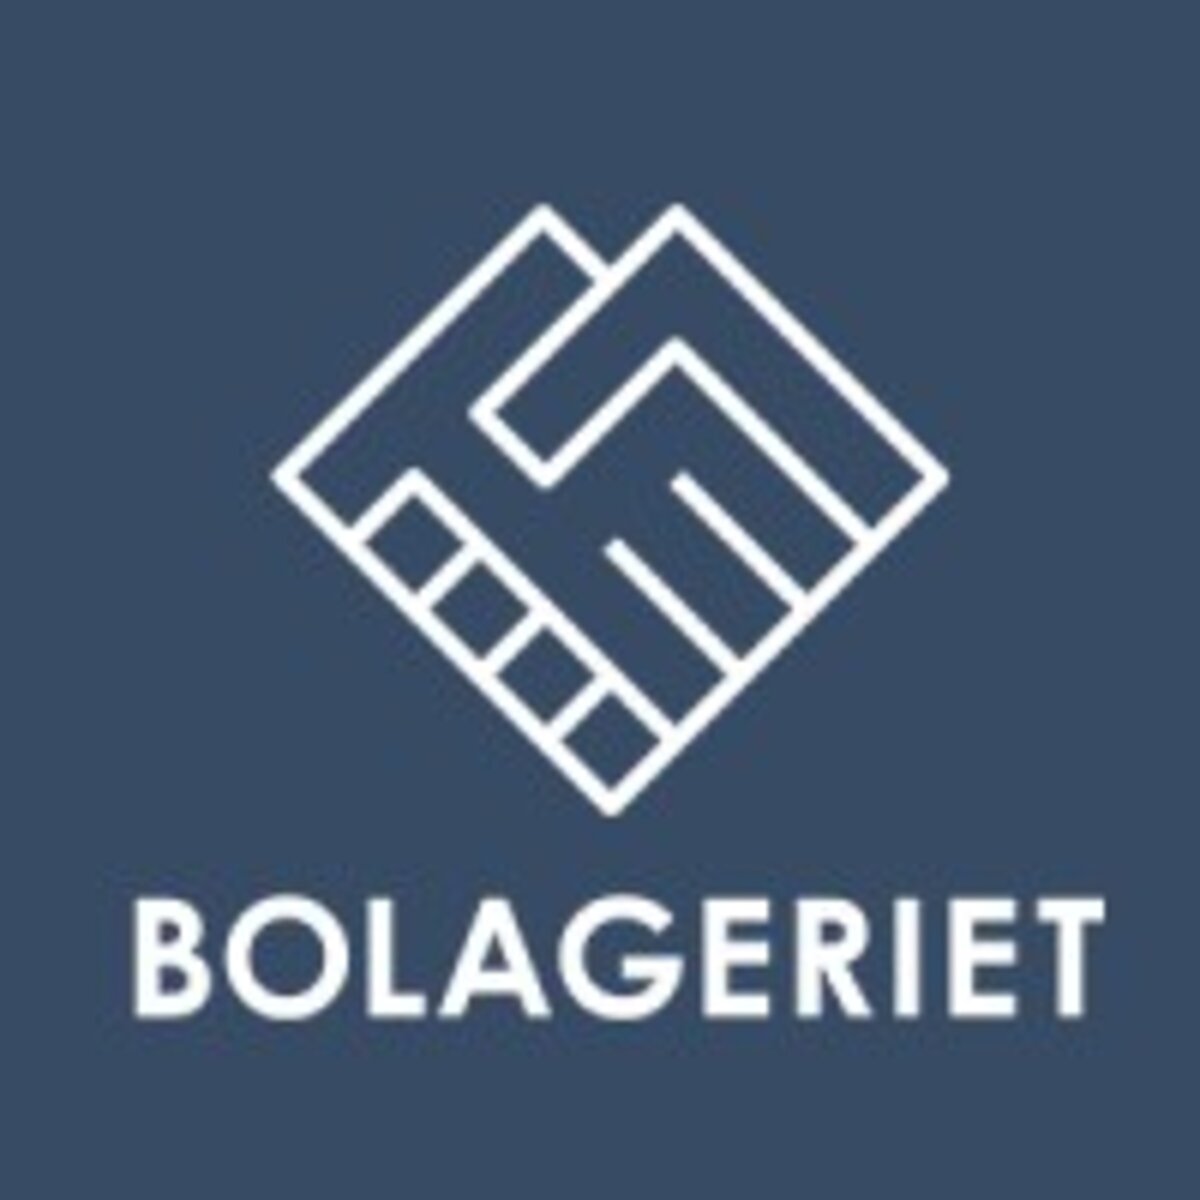 Bolageriet for Shopify